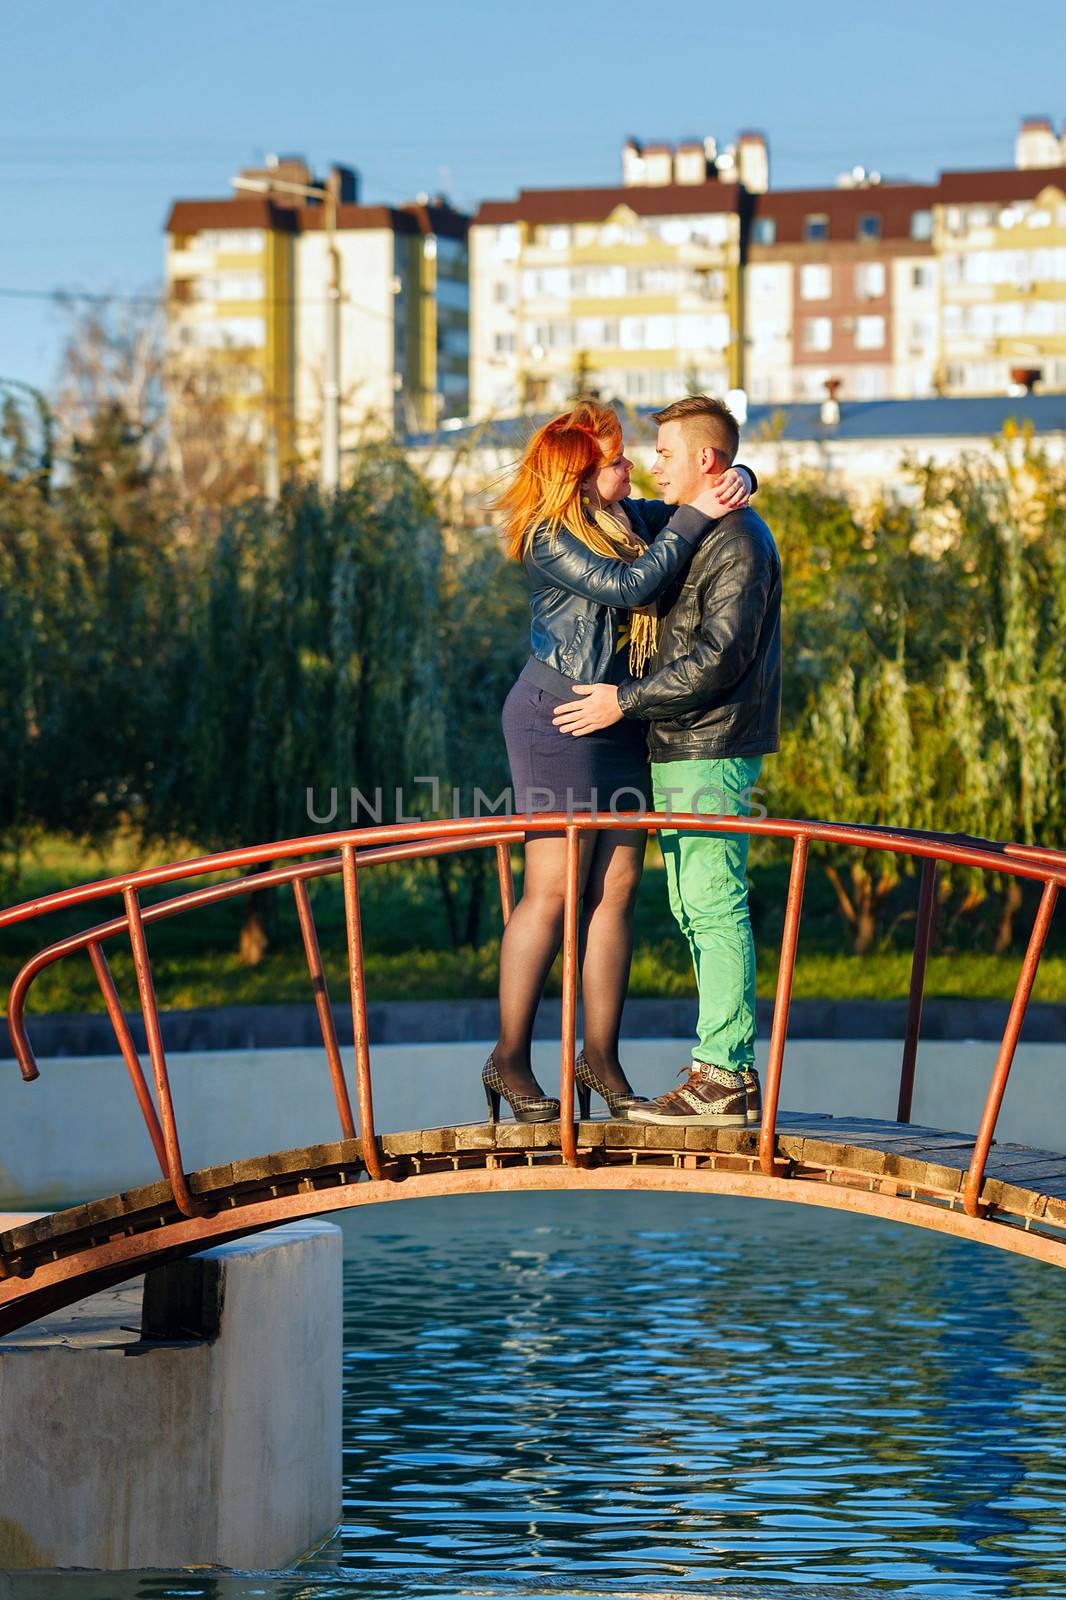 Young couple embracing standing on the bridge in the city park